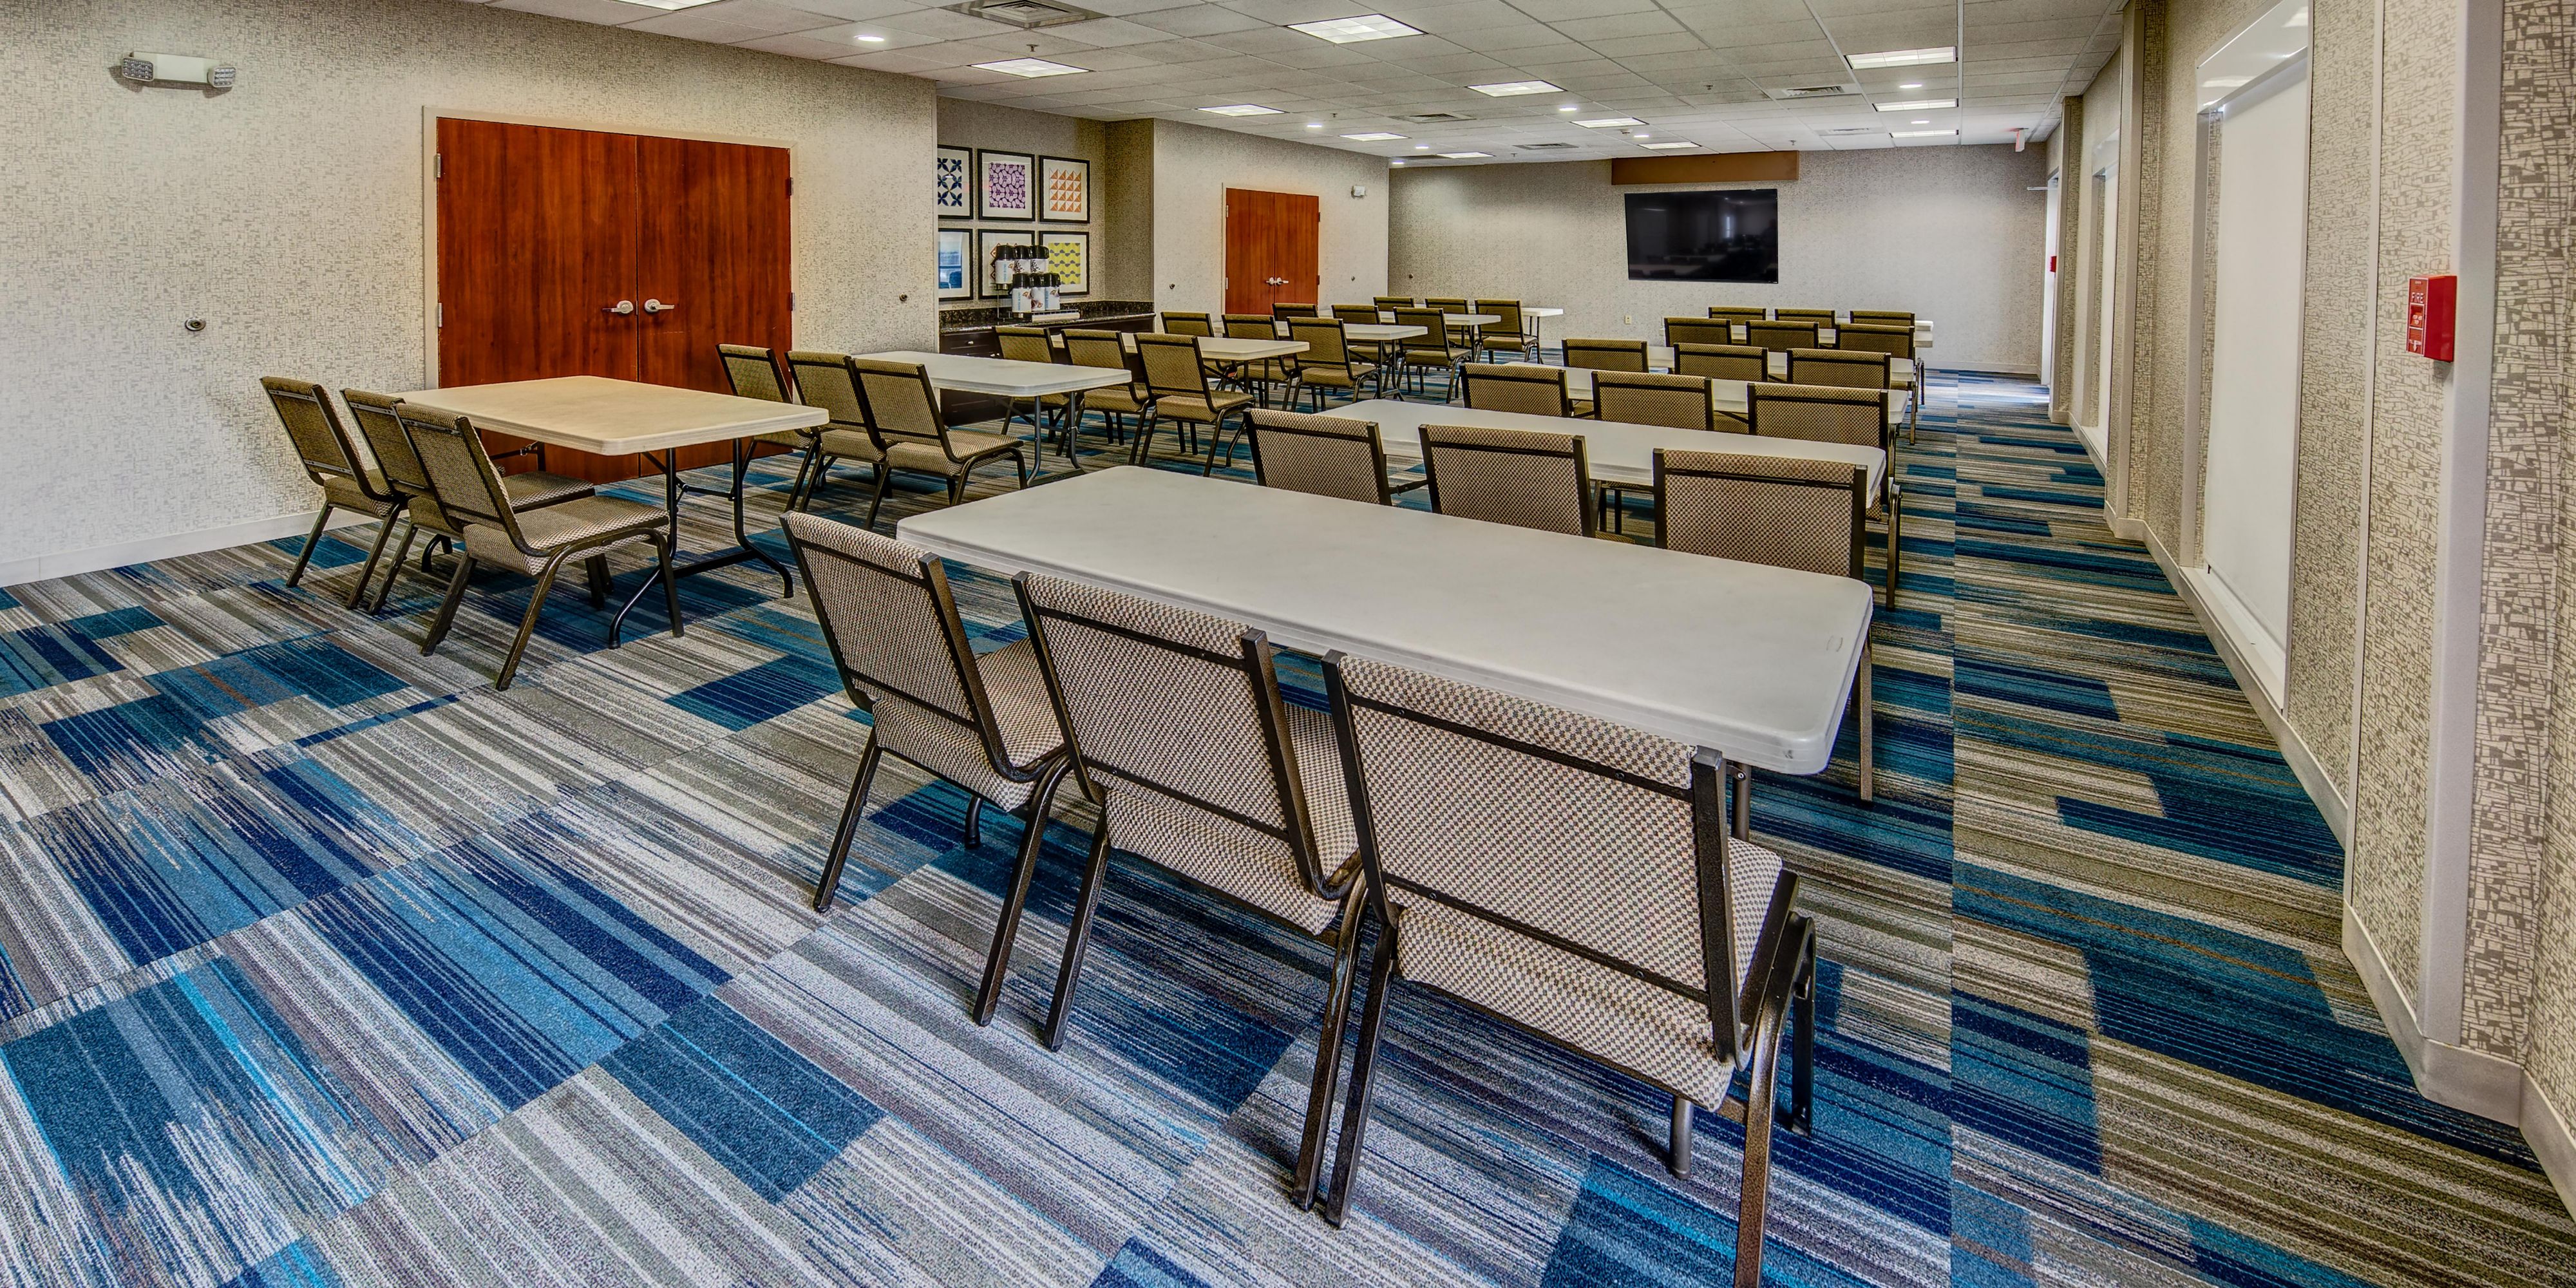 The Holiday Inn Express meeting room is perfect for your needs.  The space holds up to 70 people and can be used for business meetings, conferences, family events and celebrations. The space features entry from the hotel as well as access from the parking lot.